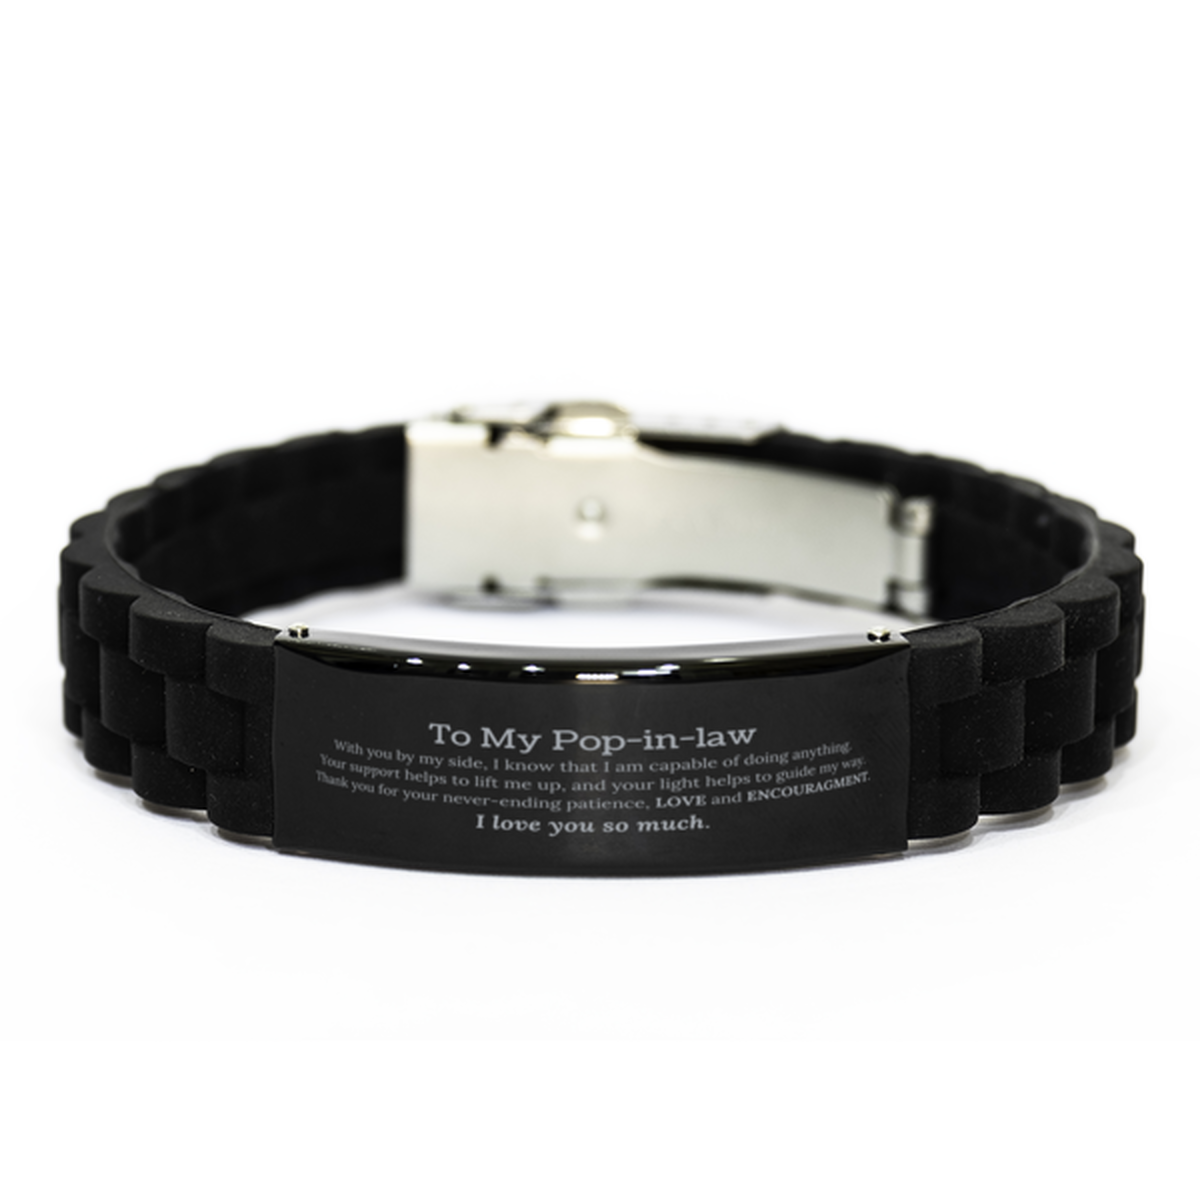 Appreciation Pop-in-law Black Glidelock Clasp Bracelet Gifts, To My Pop-in-law Birthday Christmas Wedding Keepsake Gifts for Pop-in-law With you by my side, I know that I am capable of doing anything. I love you so much